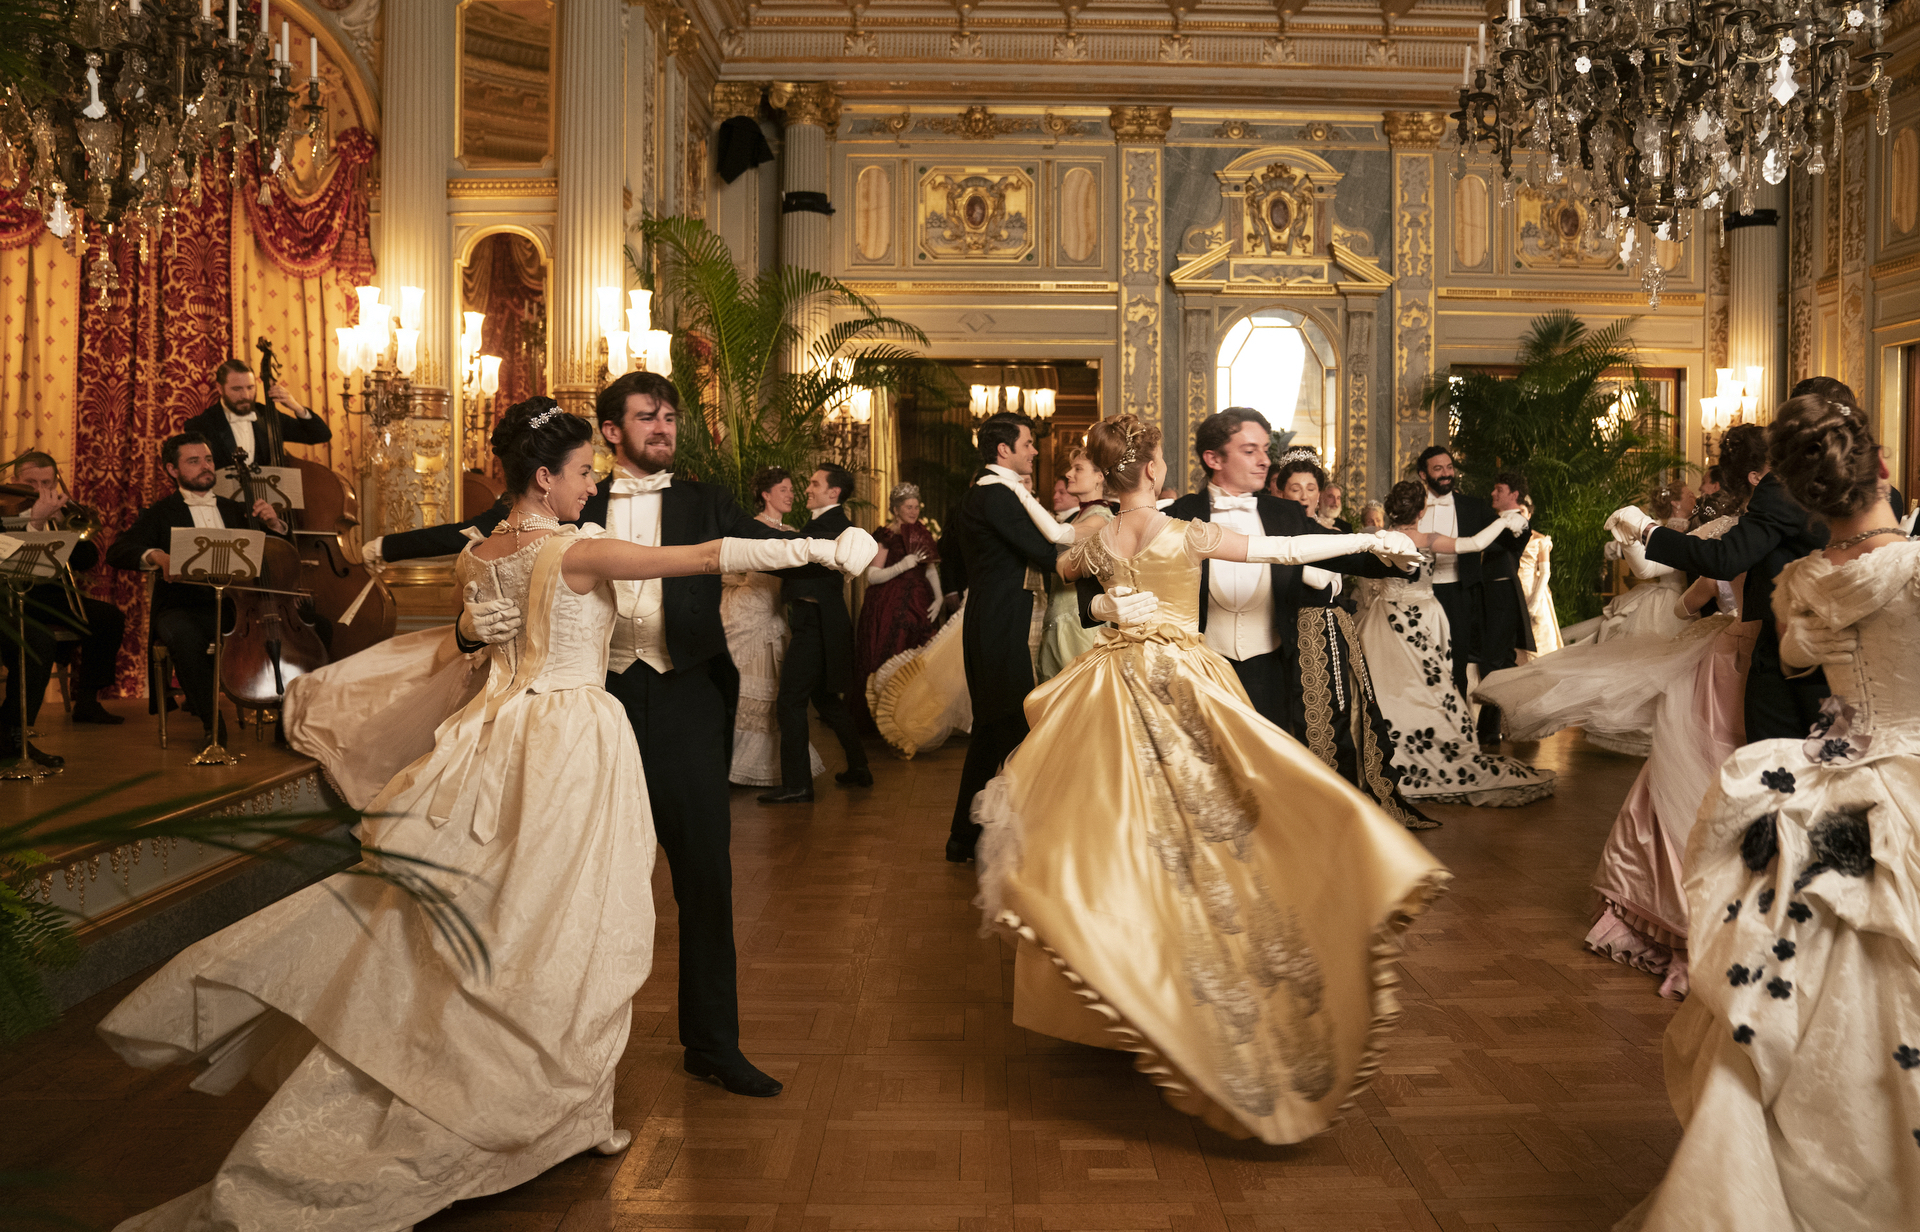 Ballroom scene in The Gilded Age on HBO, shot at The Breakers – a Renaissance-style mansion built by Cornelius Vanderbilt II and designed by architect Richard Morris Hunt  - Effect Magazine